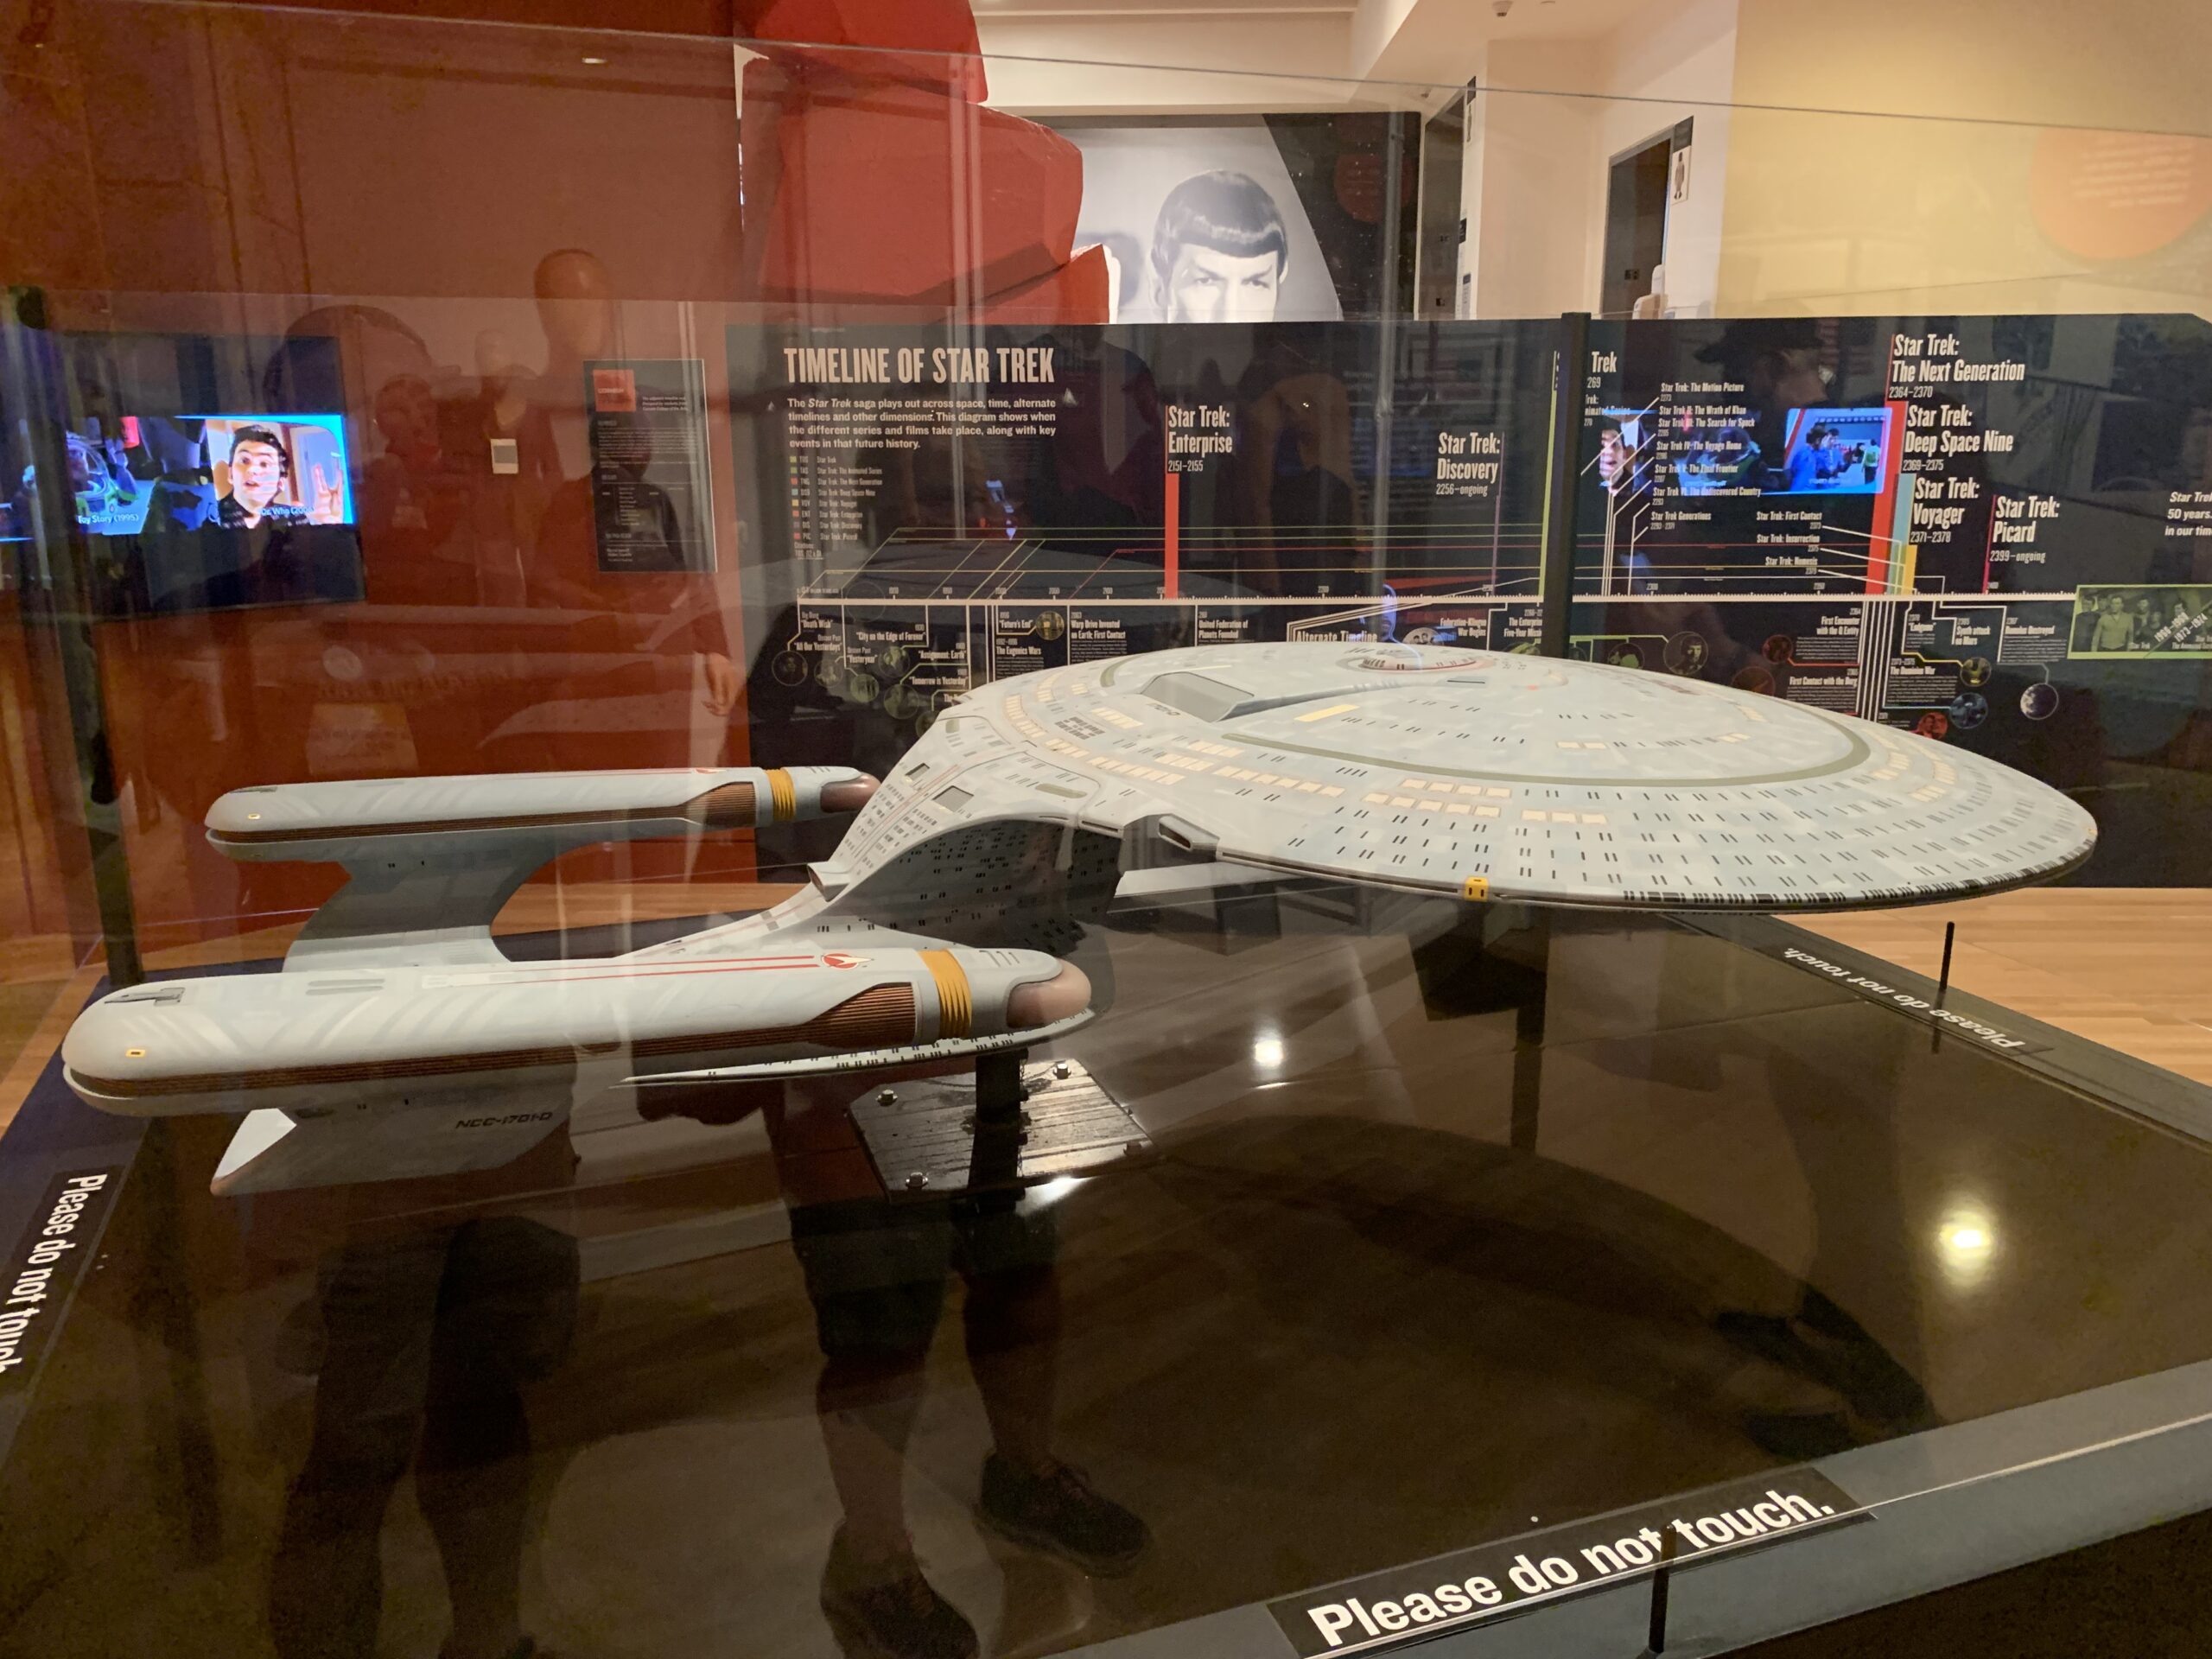 The filming model of the USS Enterprise, NCC-1701-D